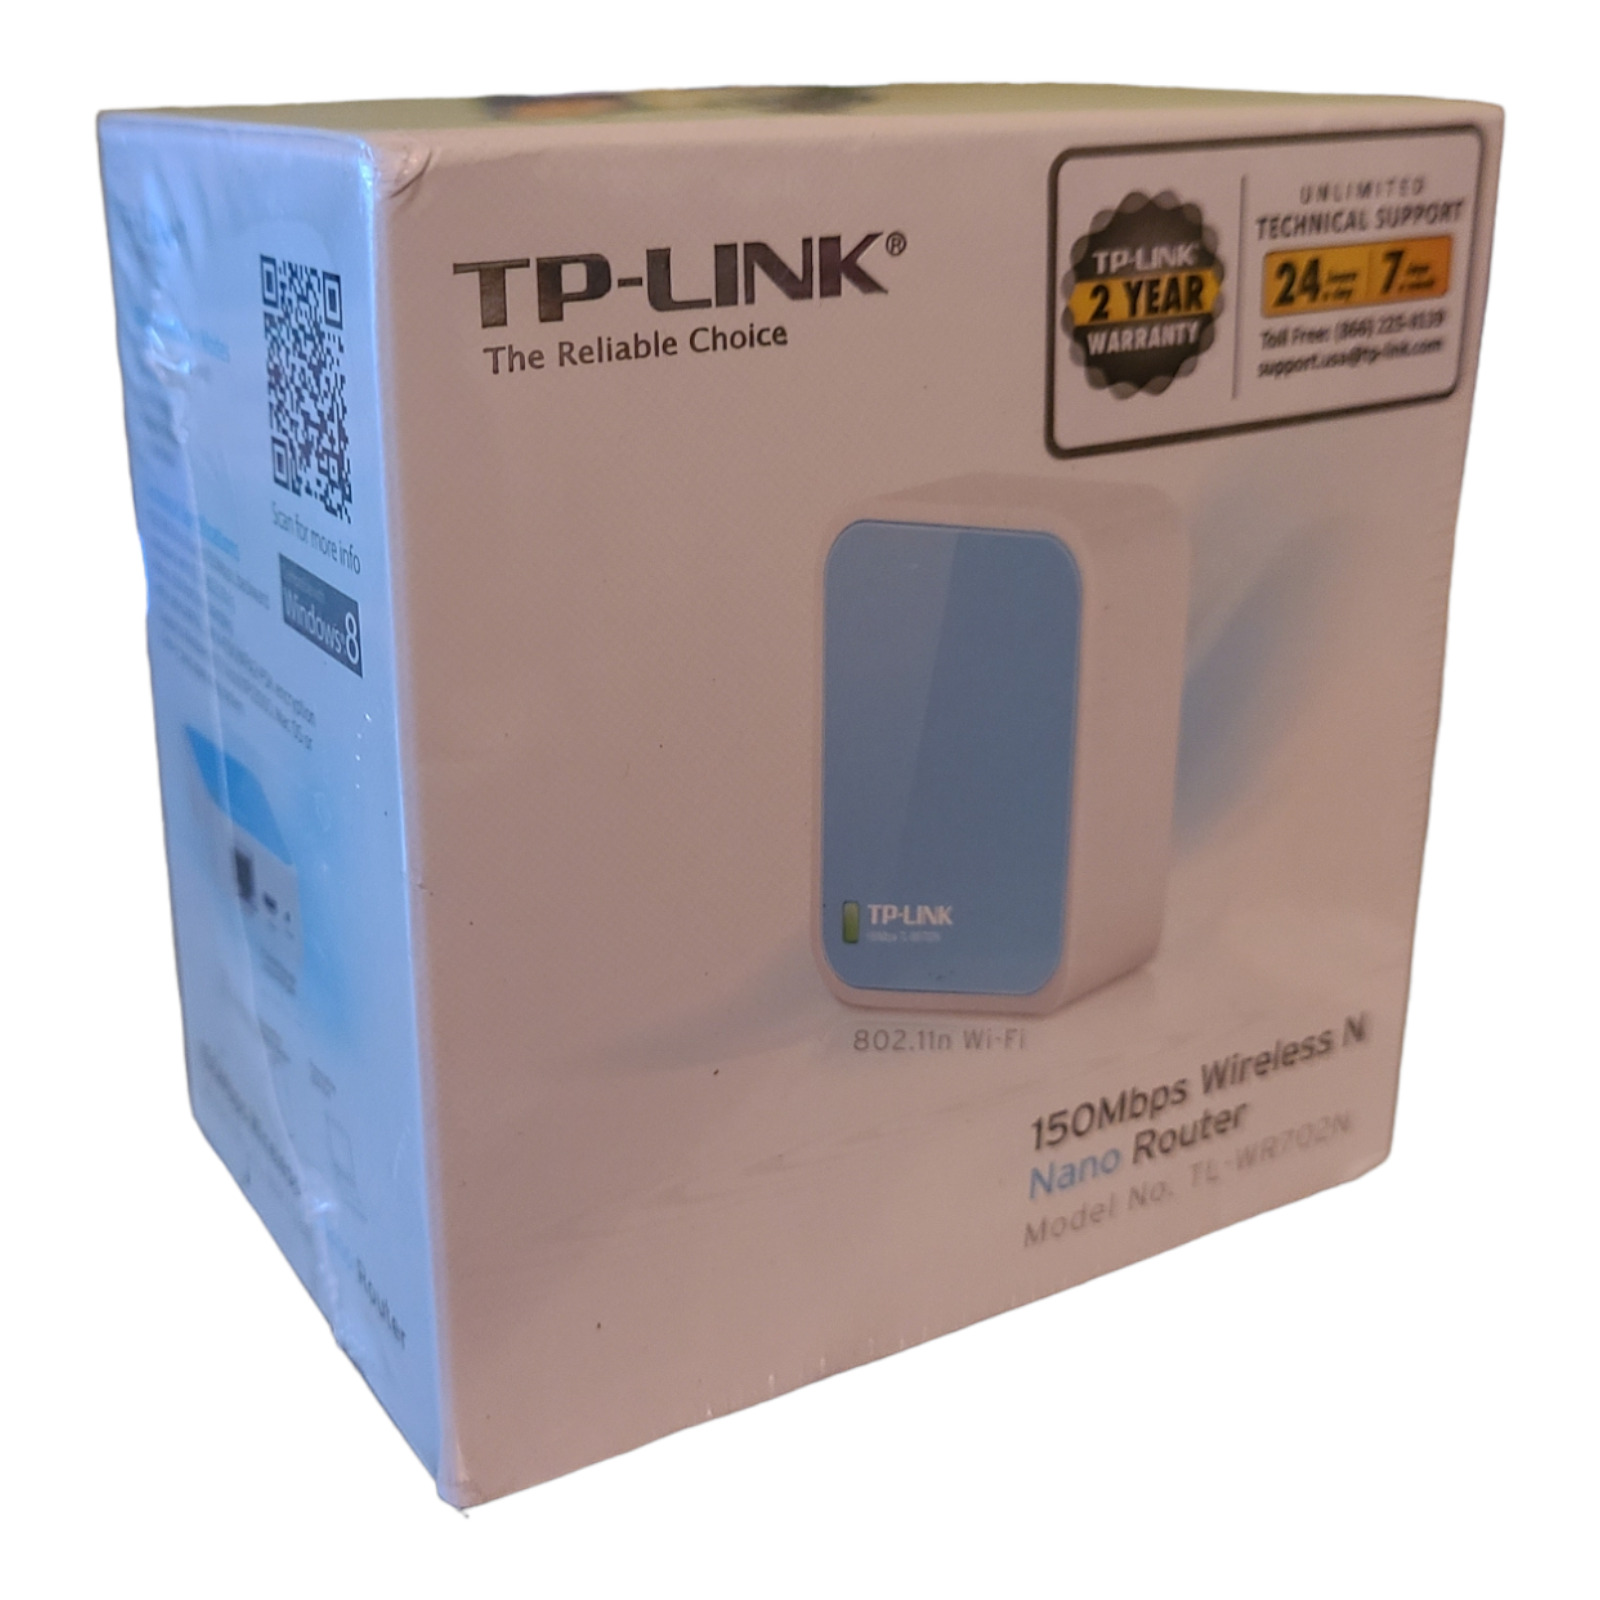 TP-Link 150Mbps Wireless N Nano Home & Travel Router Model TL-WR702N Network